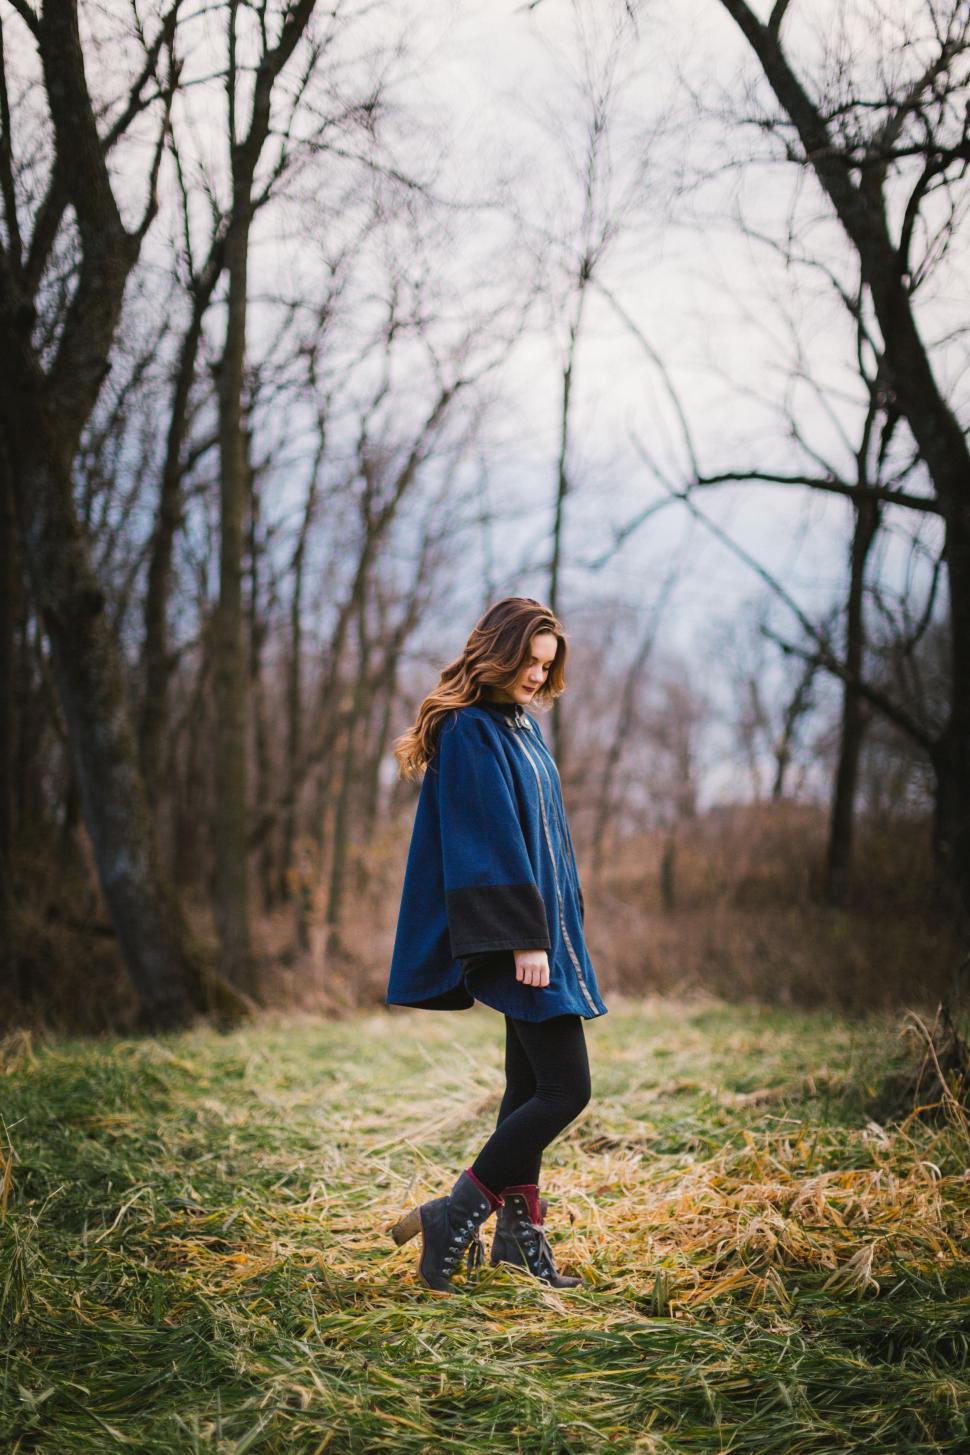 Free Image of Woman in Blue Cape Standing in Field 